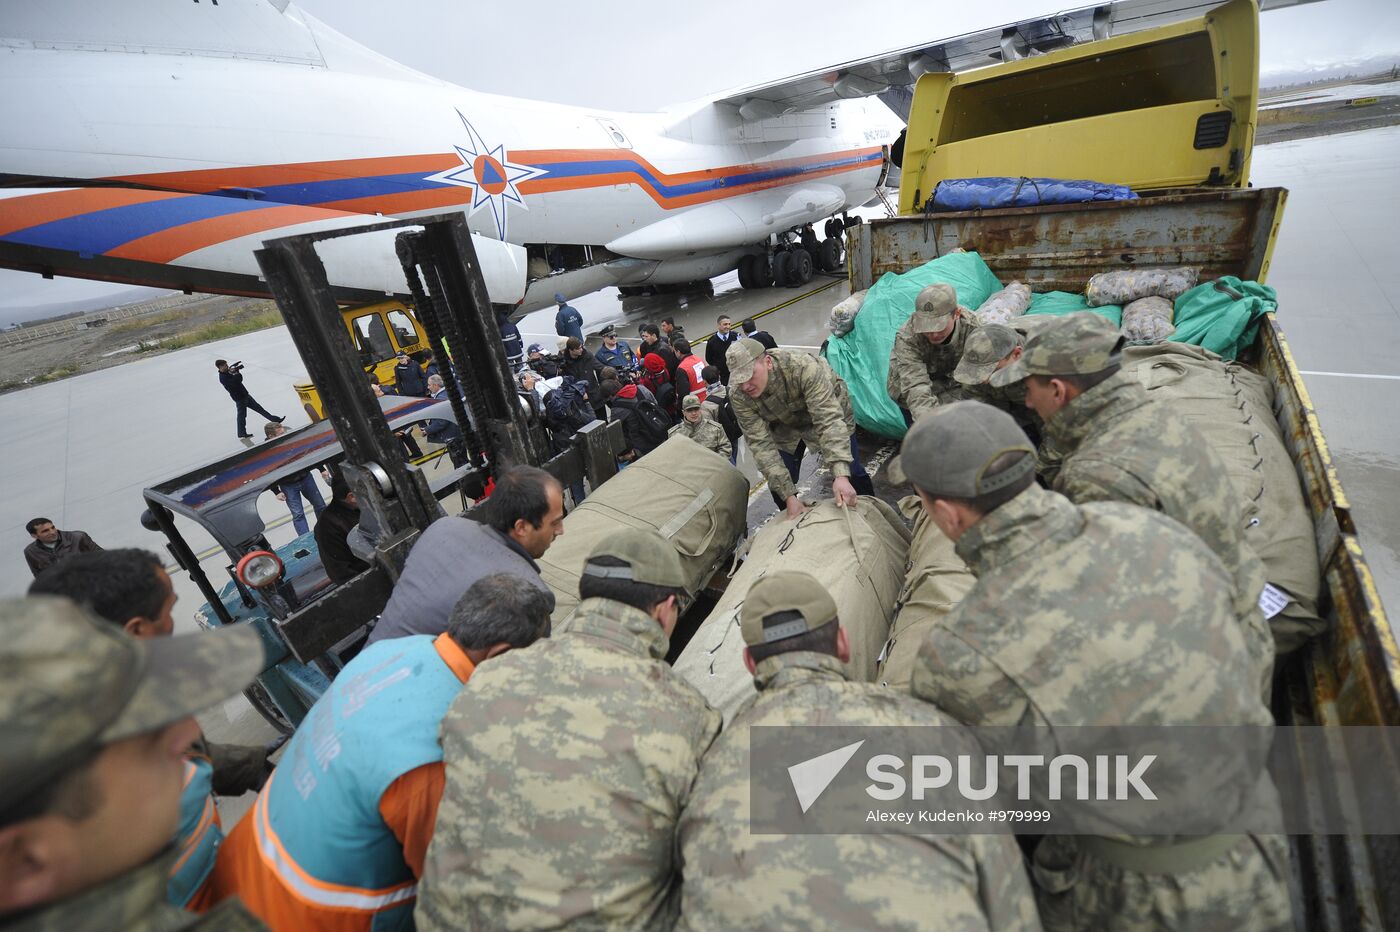 Russian humanitarian aid delivered to Turkey